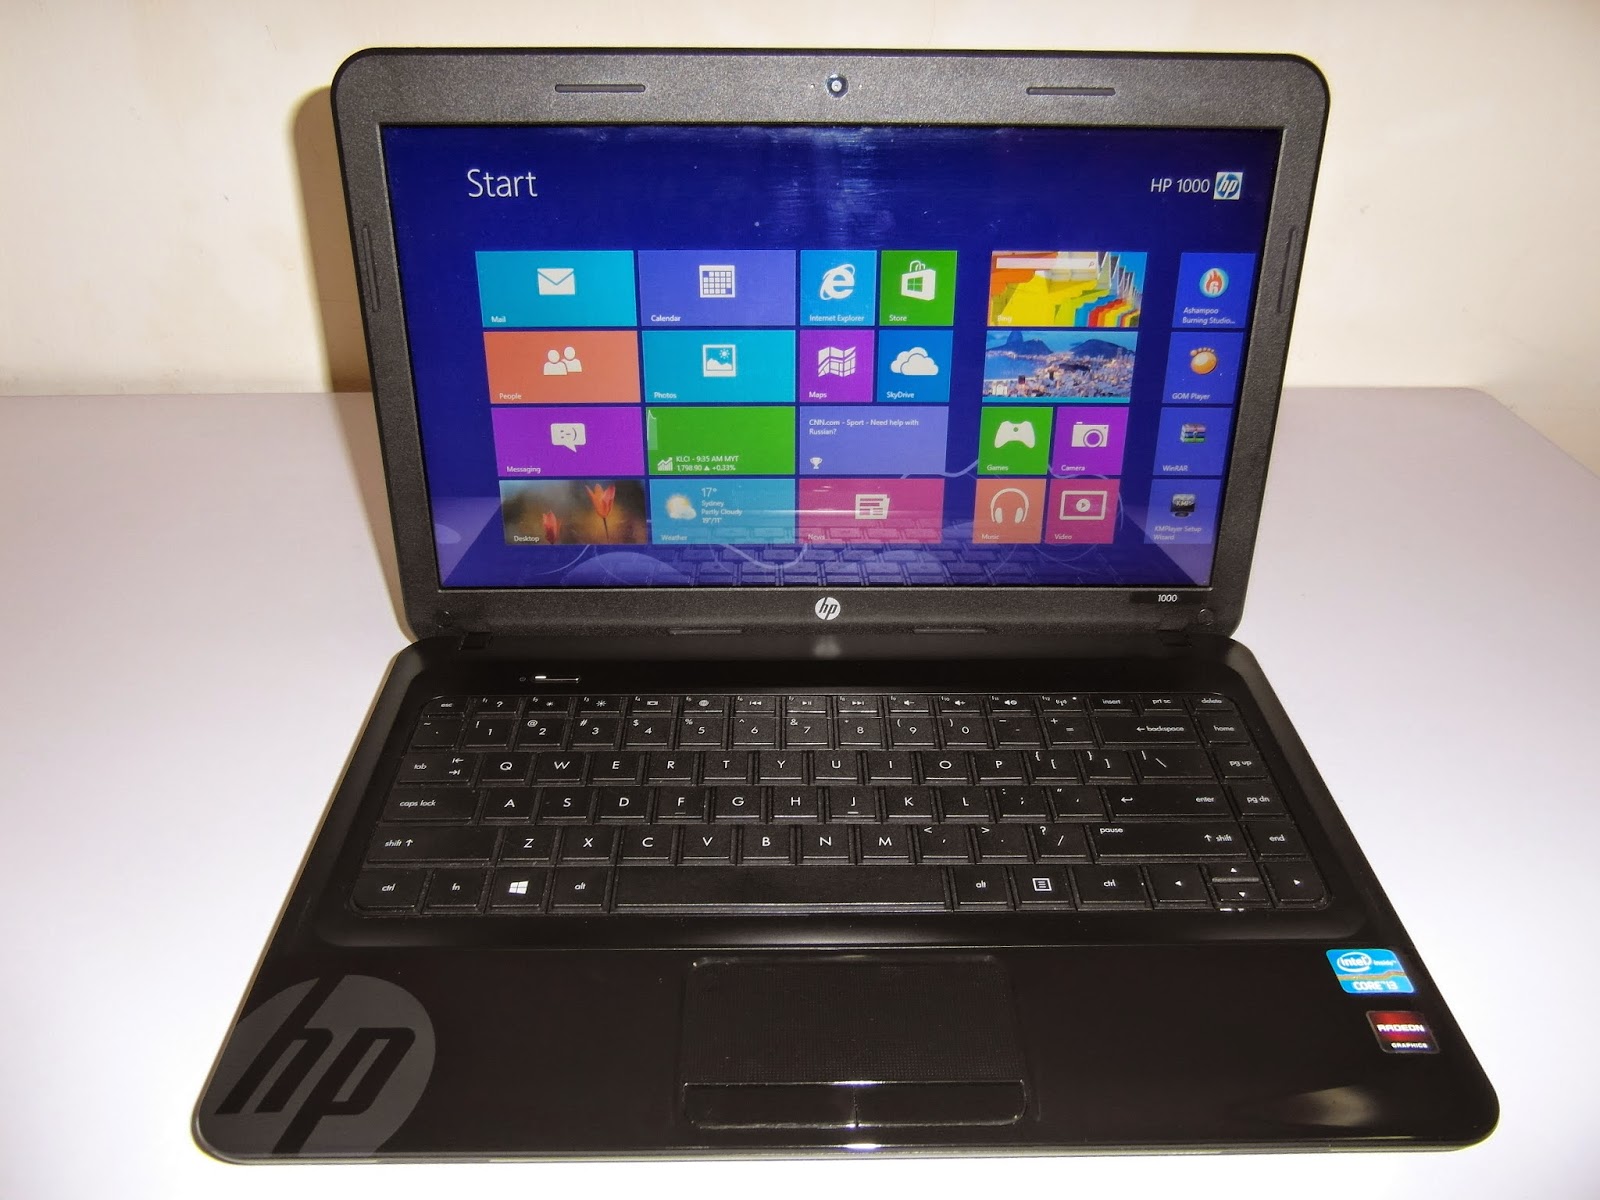 Three A Tech Computer Sales and Services: Used Laptop HP 1000-1201TX